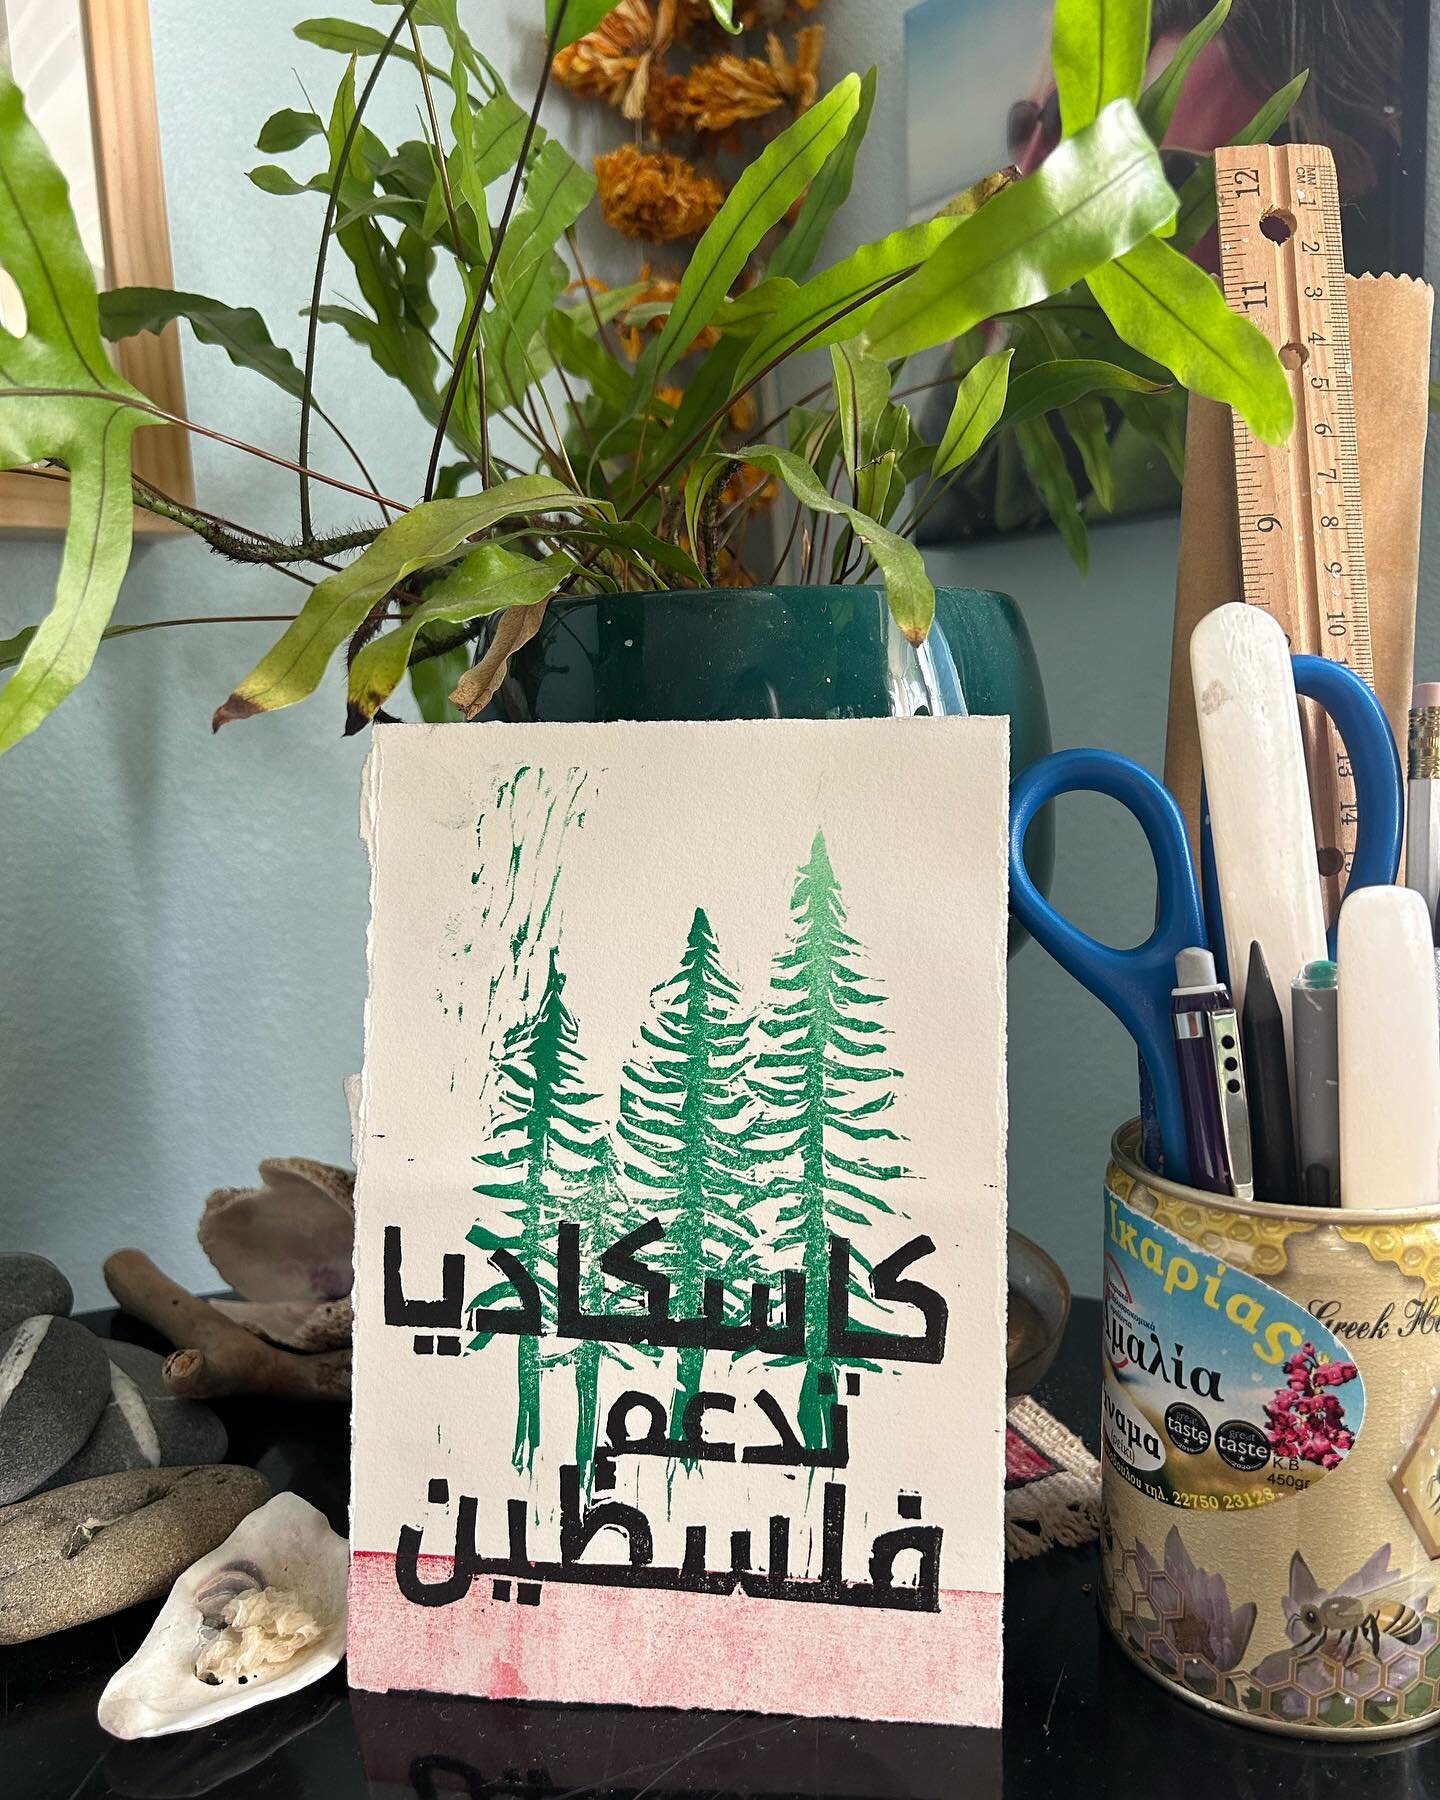 Thanks for this print, Themba Lewis. 

Cascadia Supports Palestine.
.
.
#ceasefirenow🇵🇸 #cascadiasupportspalestine